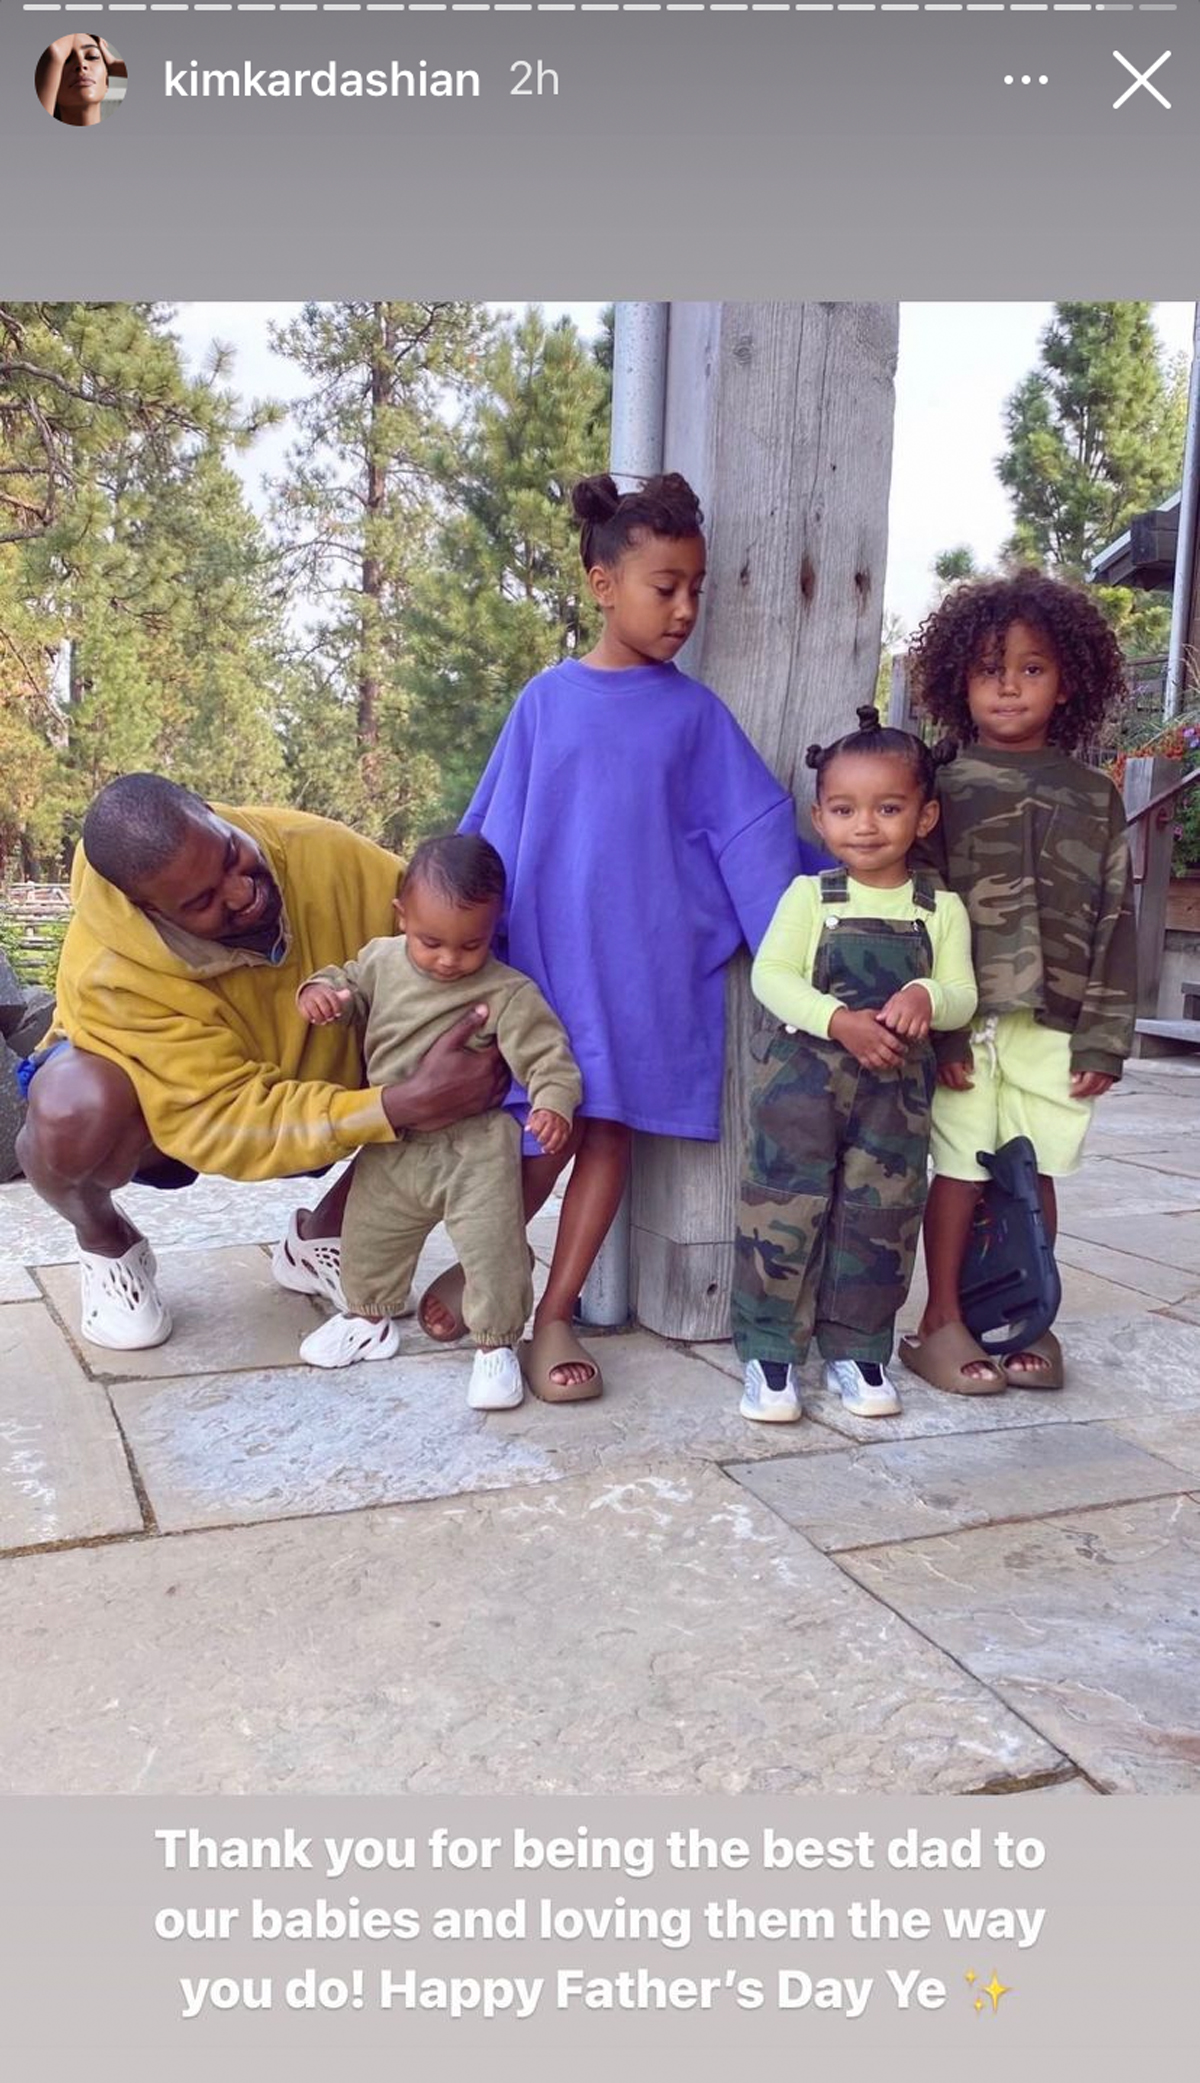 Kim Kardashian Praises Kanye West For Being The ‘Best Dad’ To Their Kids In Father’s Day Tribute